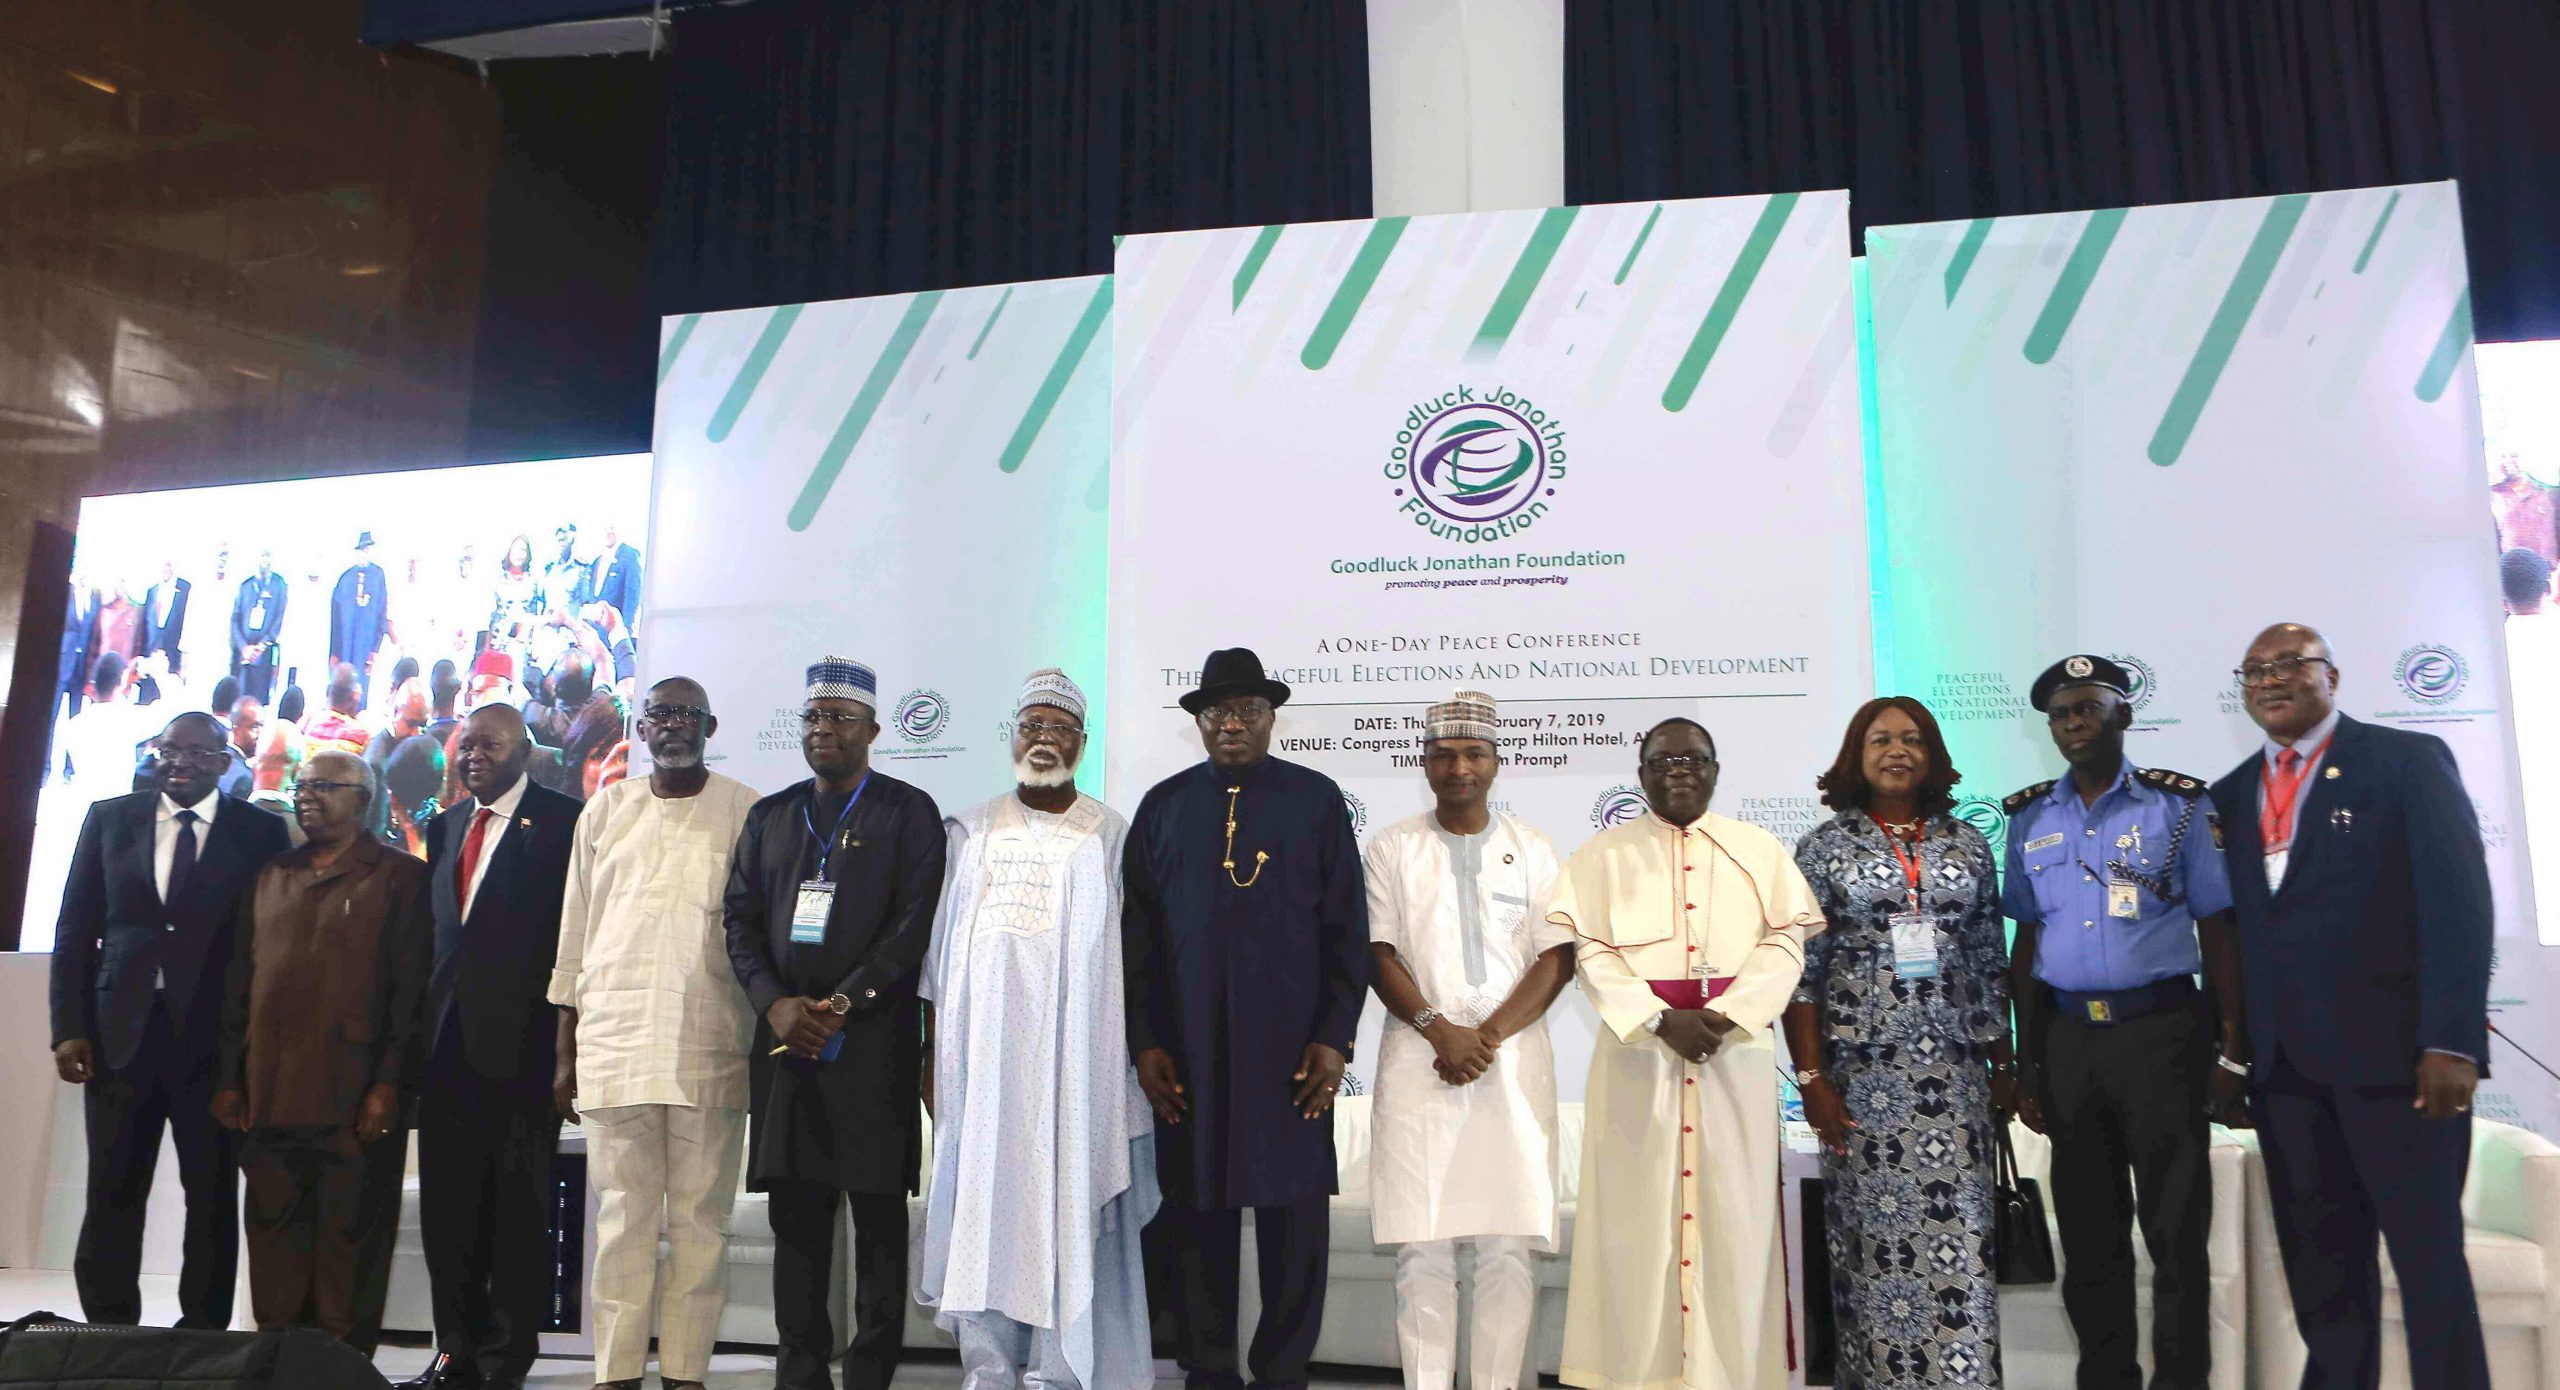 Video from the Goodluck Jonathan Foundation (GJF) One-day Peace Conference